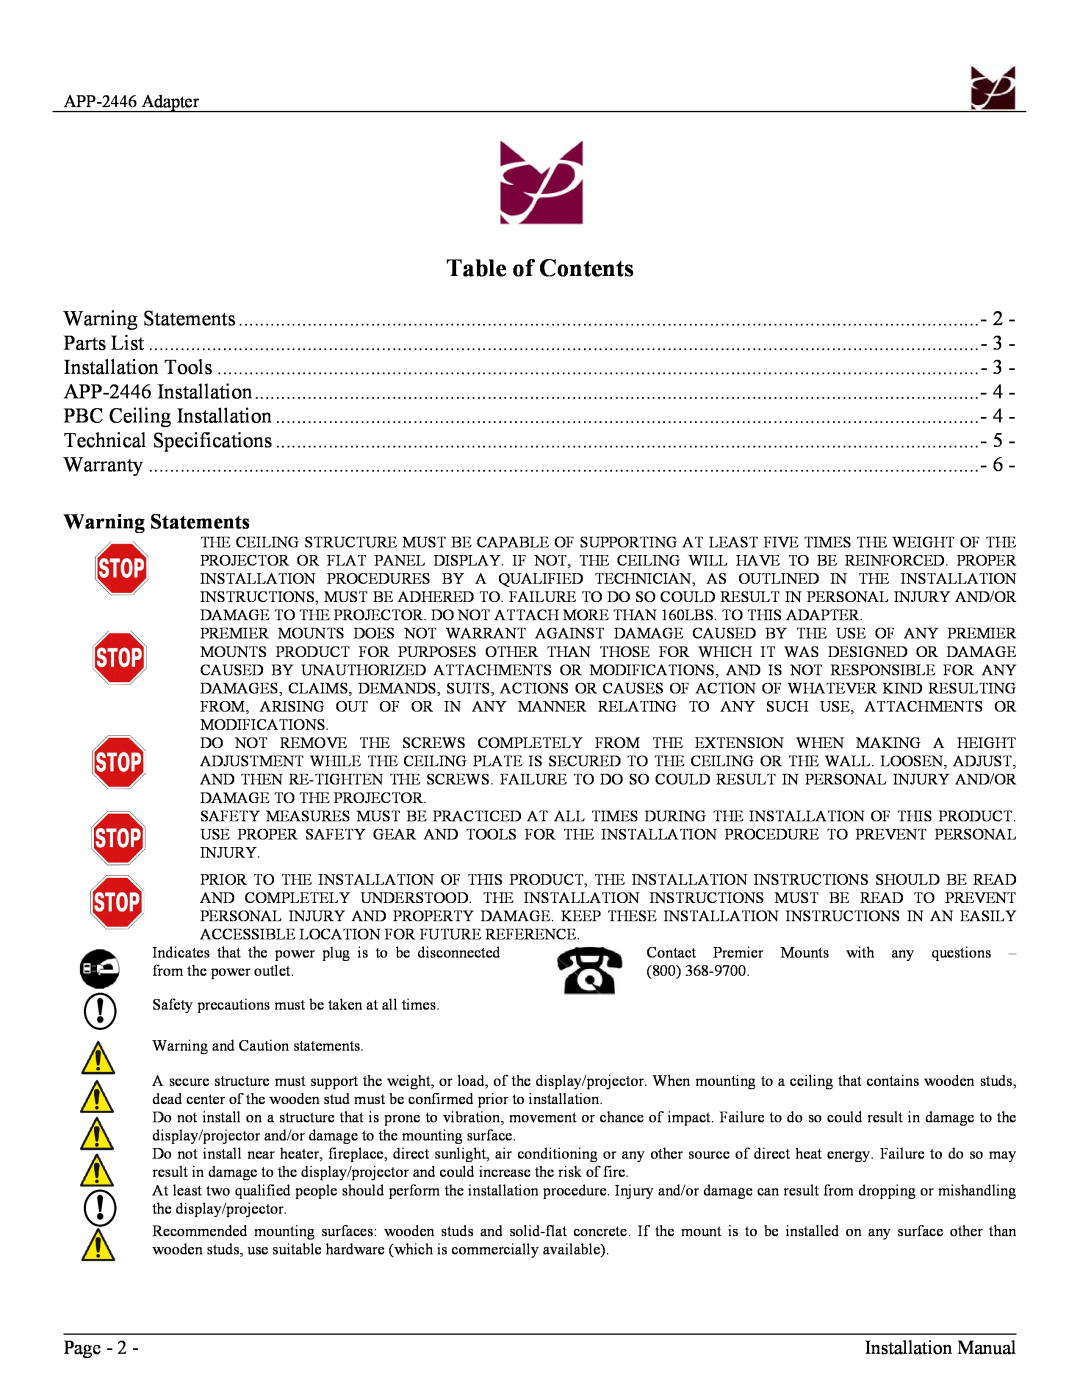 Premier Mounts APP-2446 installation instructions Table of Contents, Warning Statements, Page, Installation Manual 